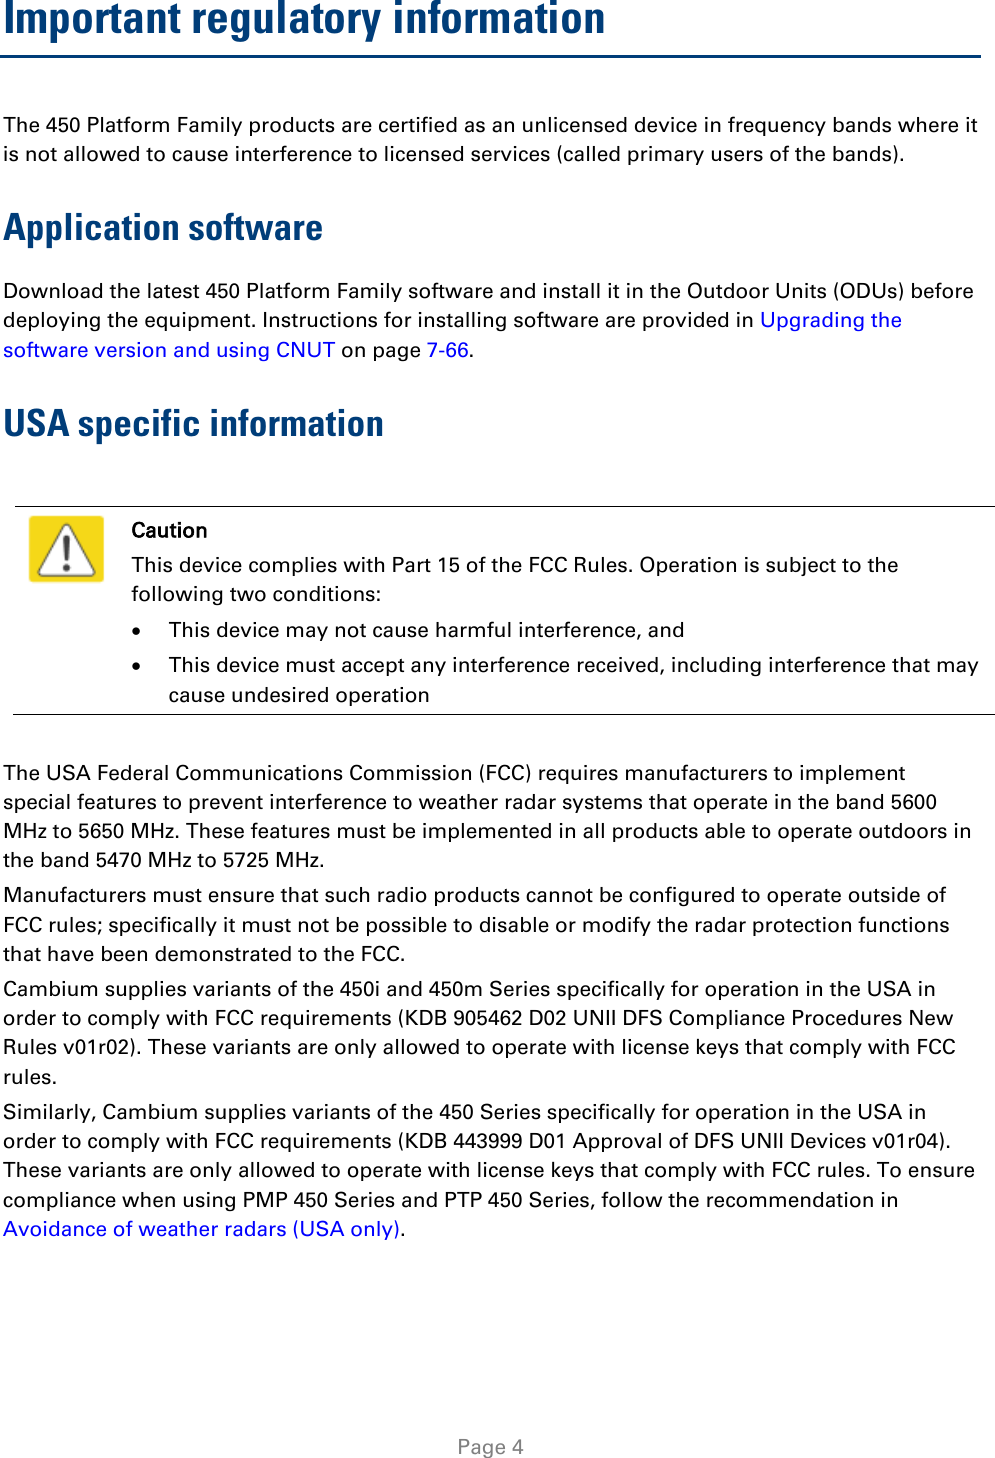   Page 4 Important regulatory information The 450 Platform Family products are certified as an unlicensed device in frequency bands where it is not allowed to cause interference to licensed services (called primary users of the bands). Application software Download the latest 450 Platform Family software and install it in the Outdoor Units (ODUs) before deploying the equipment. Instructions for installing software are provided in Upgrading the software version and using CNUT on page 7-66. USA specific information   Caution This device complies with Part 15 of the FCC Rules. Operation is subject to the following two conditions: • This device may not cause harmful interference, and • This device must accept any interference received, including interference that may cause undesired operation  The USA Federal Communications Commission (FCC) requires manufacturers to implement special features to prevent interference to weather radar systems that operate in the band 5600 MHz to 5650 MHz. These features must be implemented in all products able to operate outdoors in the band 5470 MHz to 5725 MHz. Manufacturers must ensure that such radio products cannot be configured to operate outside of FCC rules; specifically it must not be possible to disable or modify the radar protection functions that have been demonstrated to the FCC. Cambium supplies variants of the 450i and 450m Series specifically for operation in the USA in order to comply with FCC requirements (KDB 905462 D02 UNII DFS Compliance Procedures New Rules v01r02). These variants are only allowed to operate with license keys that comply with FCC rules.  Similarly, Cambium supplies variants of the 450 Series specifically for operation in the USA in order to comply with FCC requirements (KDB 443999 D01 Approval of DFS UNII Devices v01r04). These variants are only allowed to operate with license keys that comply with FCC rules. To ensure compliance when using PMP 450 Series and PTP 450 Series, follow the recommendation in Avoidance of weather radars (USA only).  